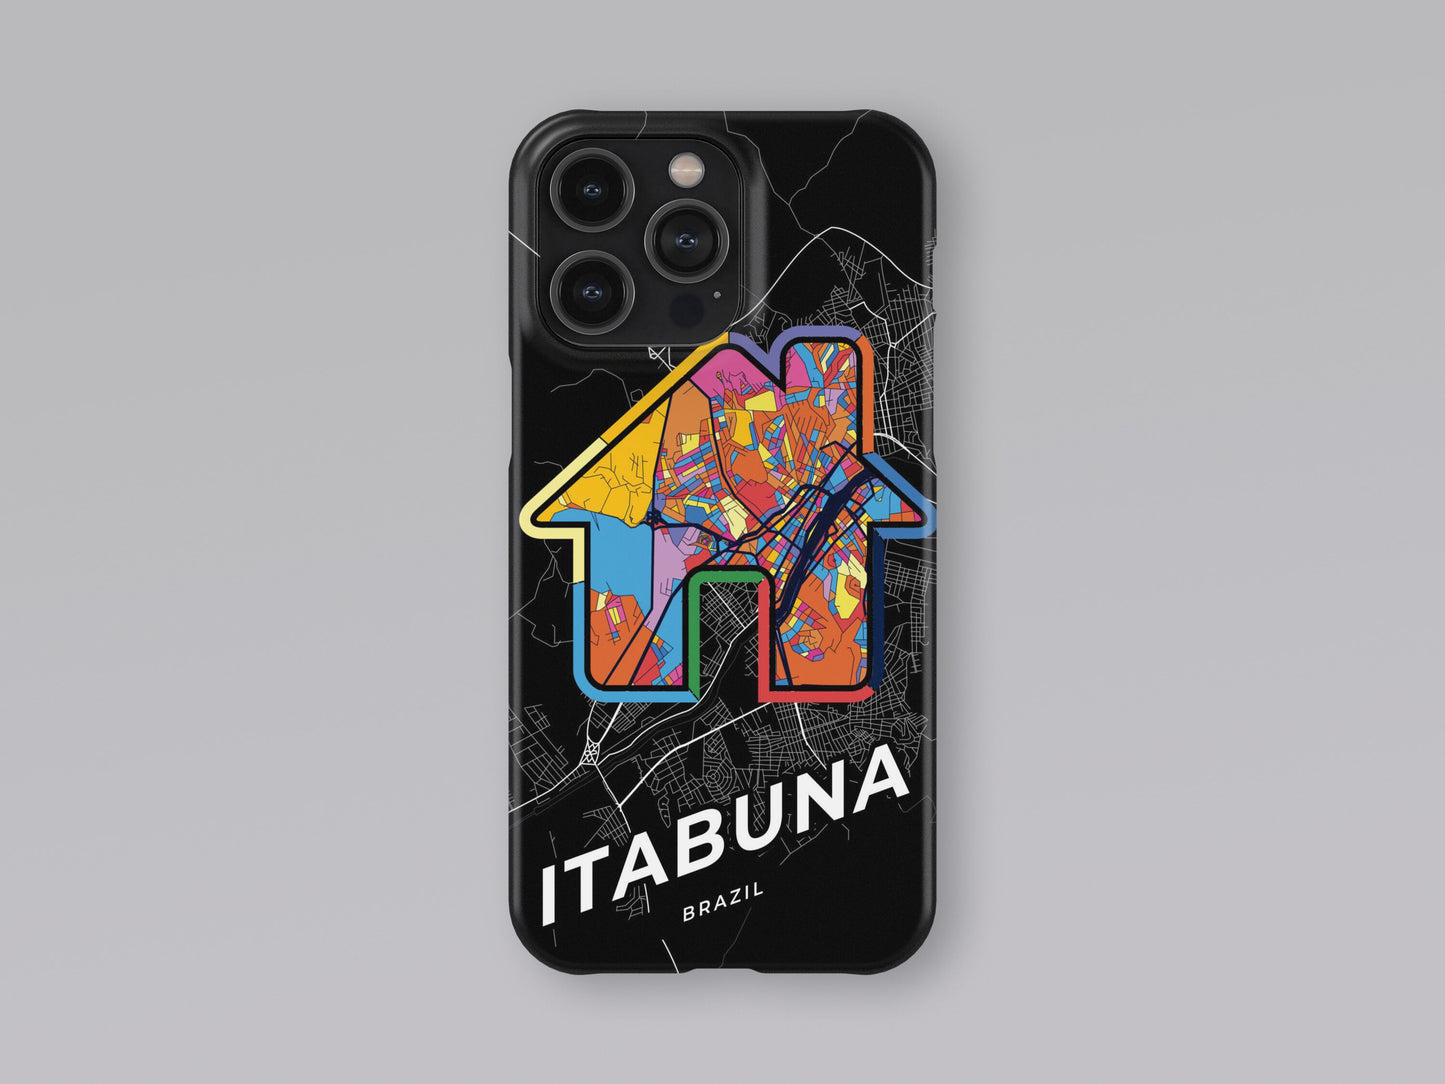 Itabuna Brazil slim phone case with colorful icon. Birthday, wedding or housewarming gift. Couple match cases. 3